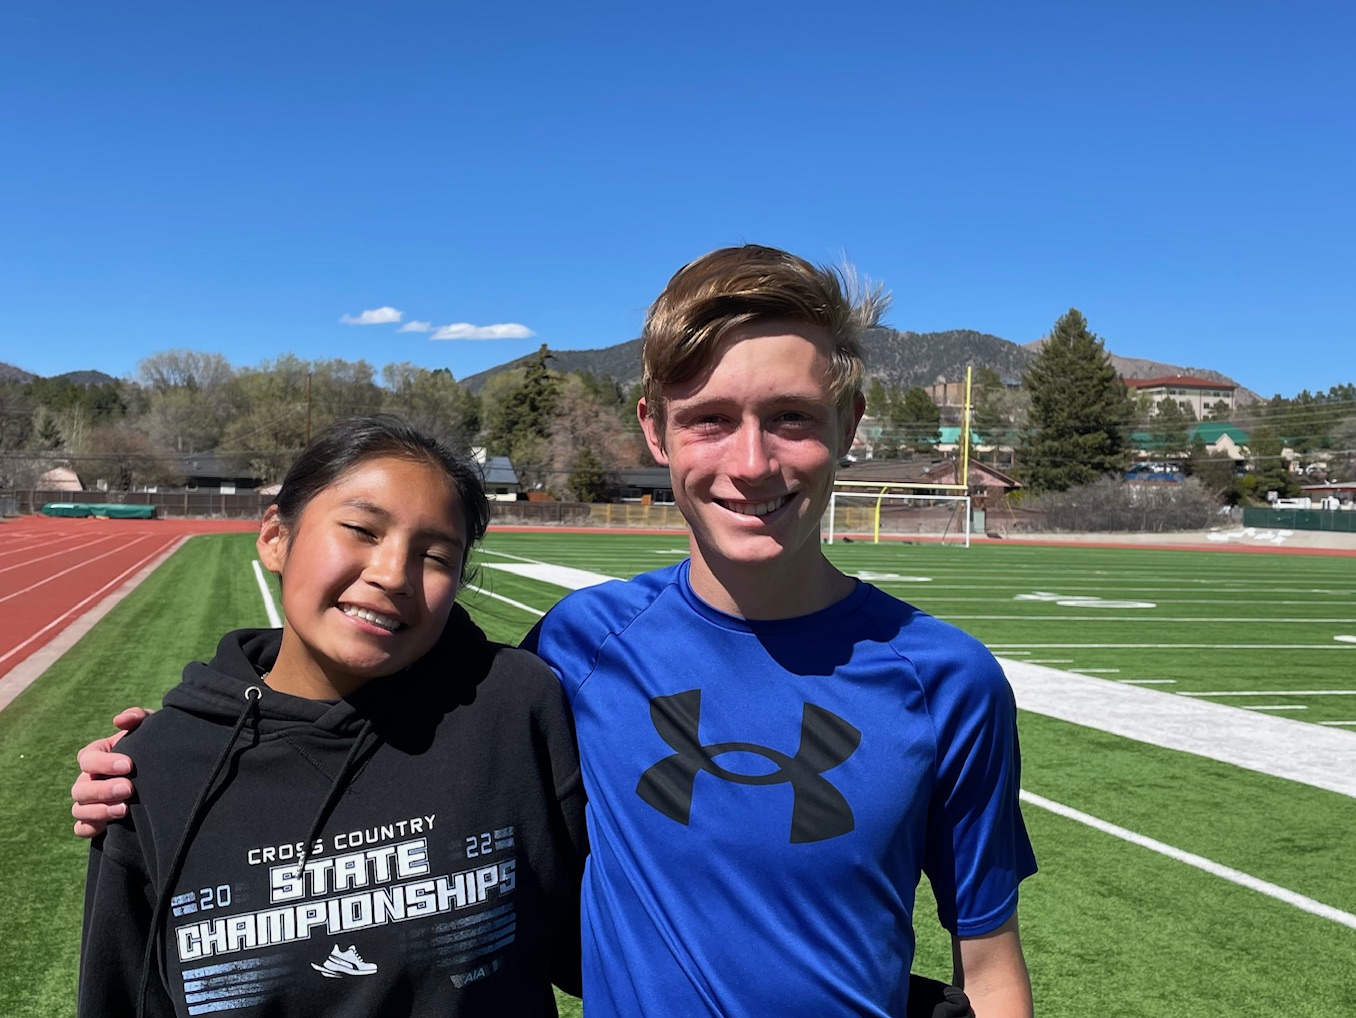 PROFILE: Flagstaff High’s Super Sophomores Biggambler and Bland Poised for Division III Success